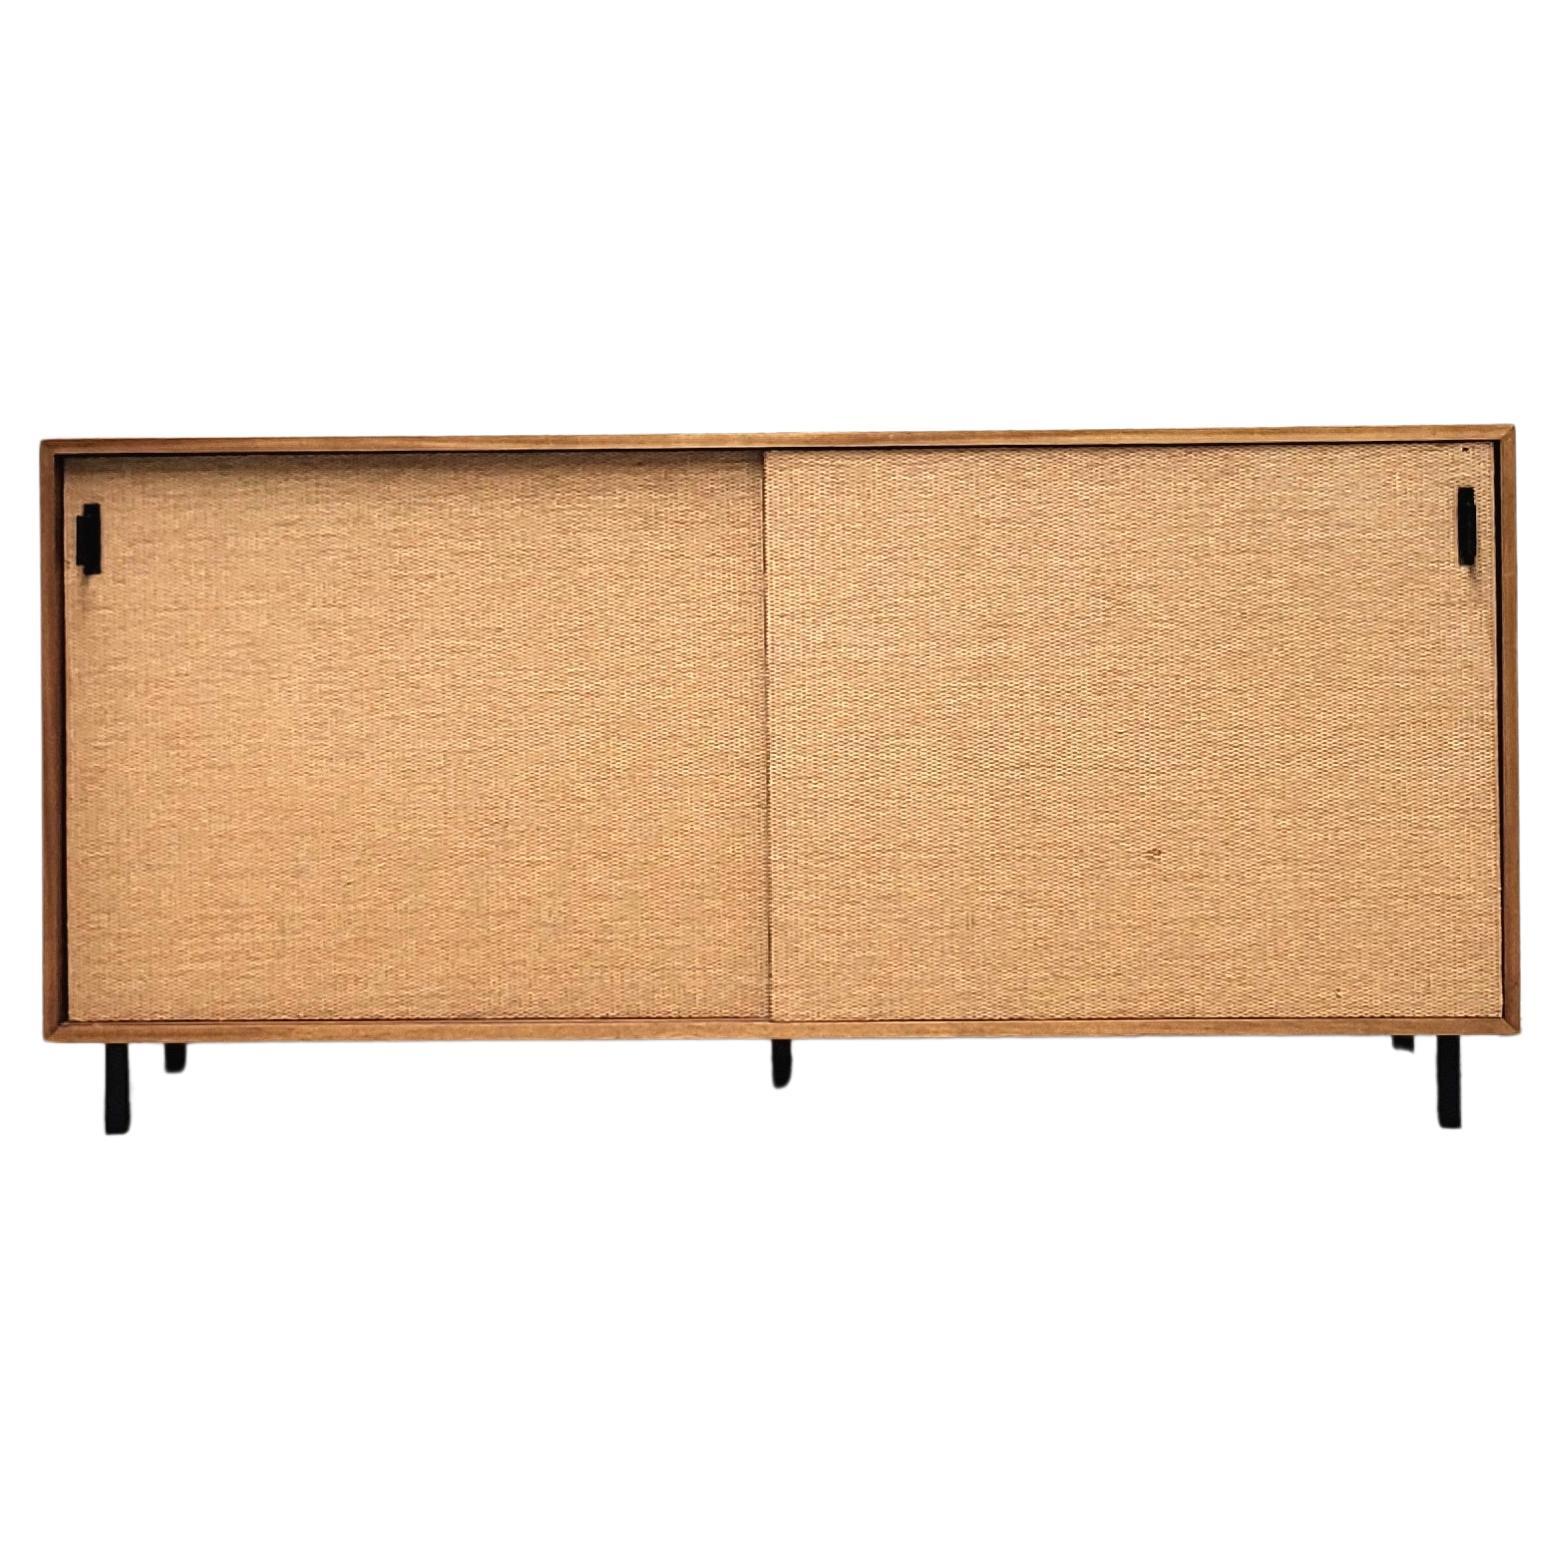 Florence Knoll Seagrass Sideboard by Knoll for Wohnbedarf, 1952